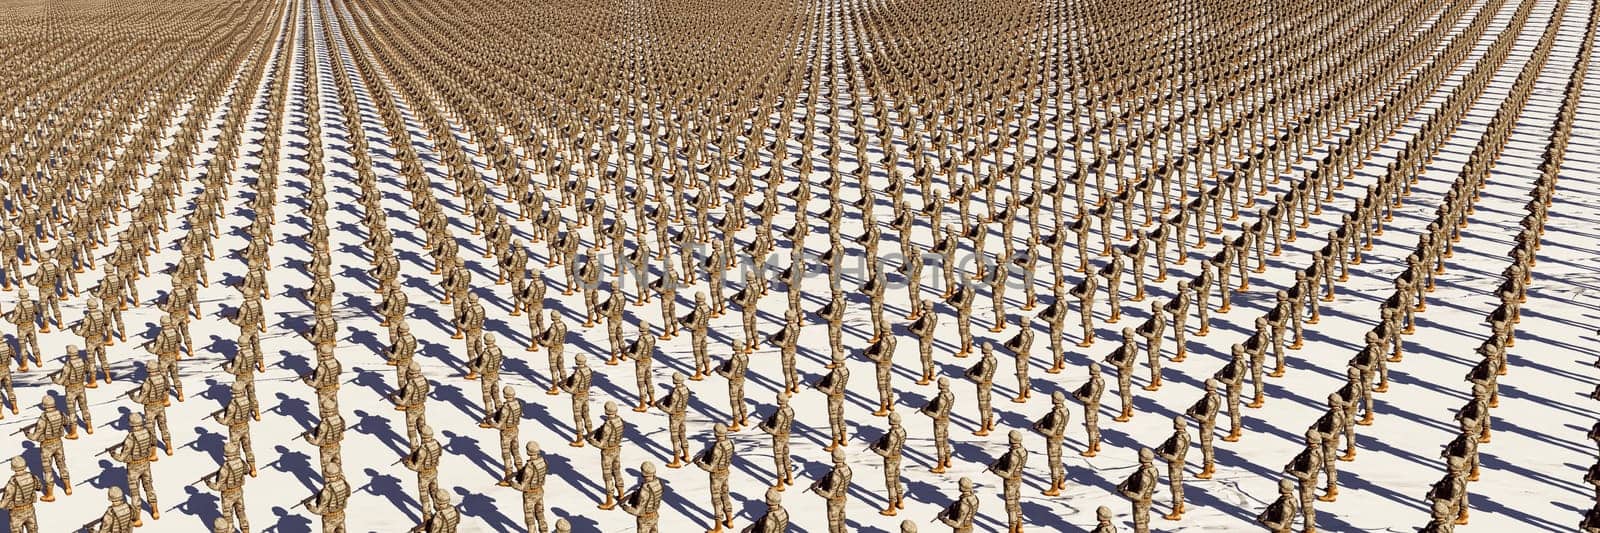 Endless Army of Digital Soldiers Marching in Desert Camouflage on a White Background by Juanjo39